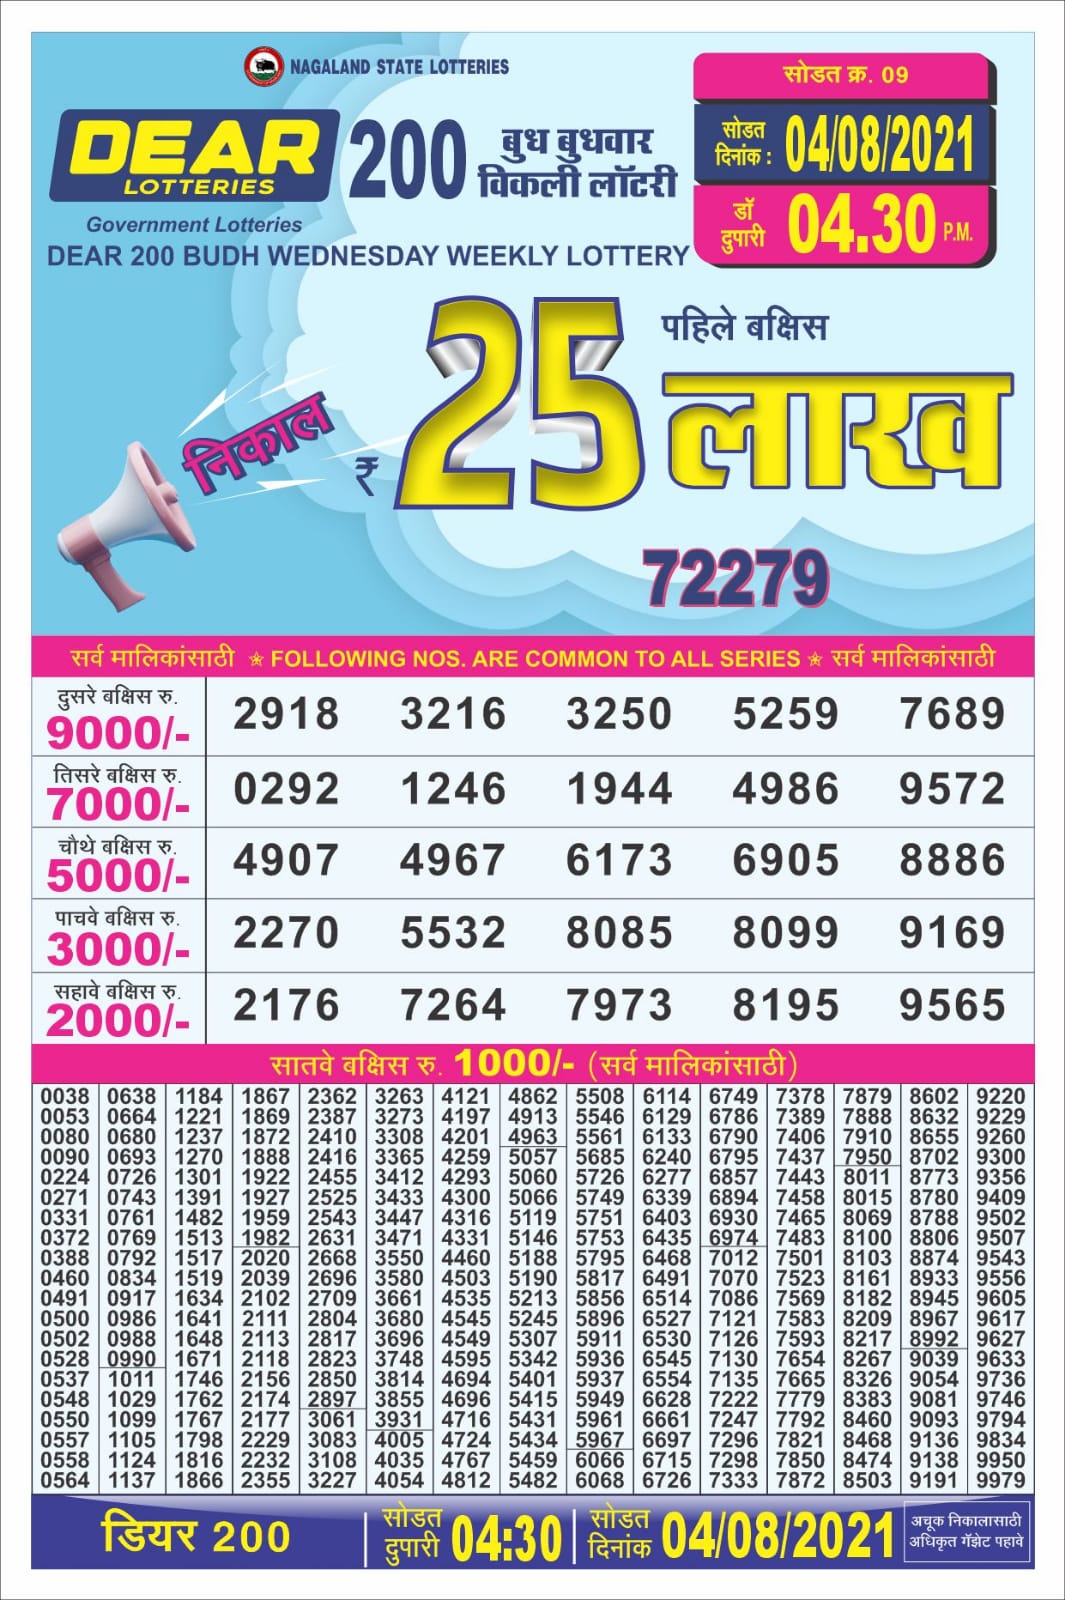 Dear 200 budh weekly lottery 04.30pm 04-08-2021